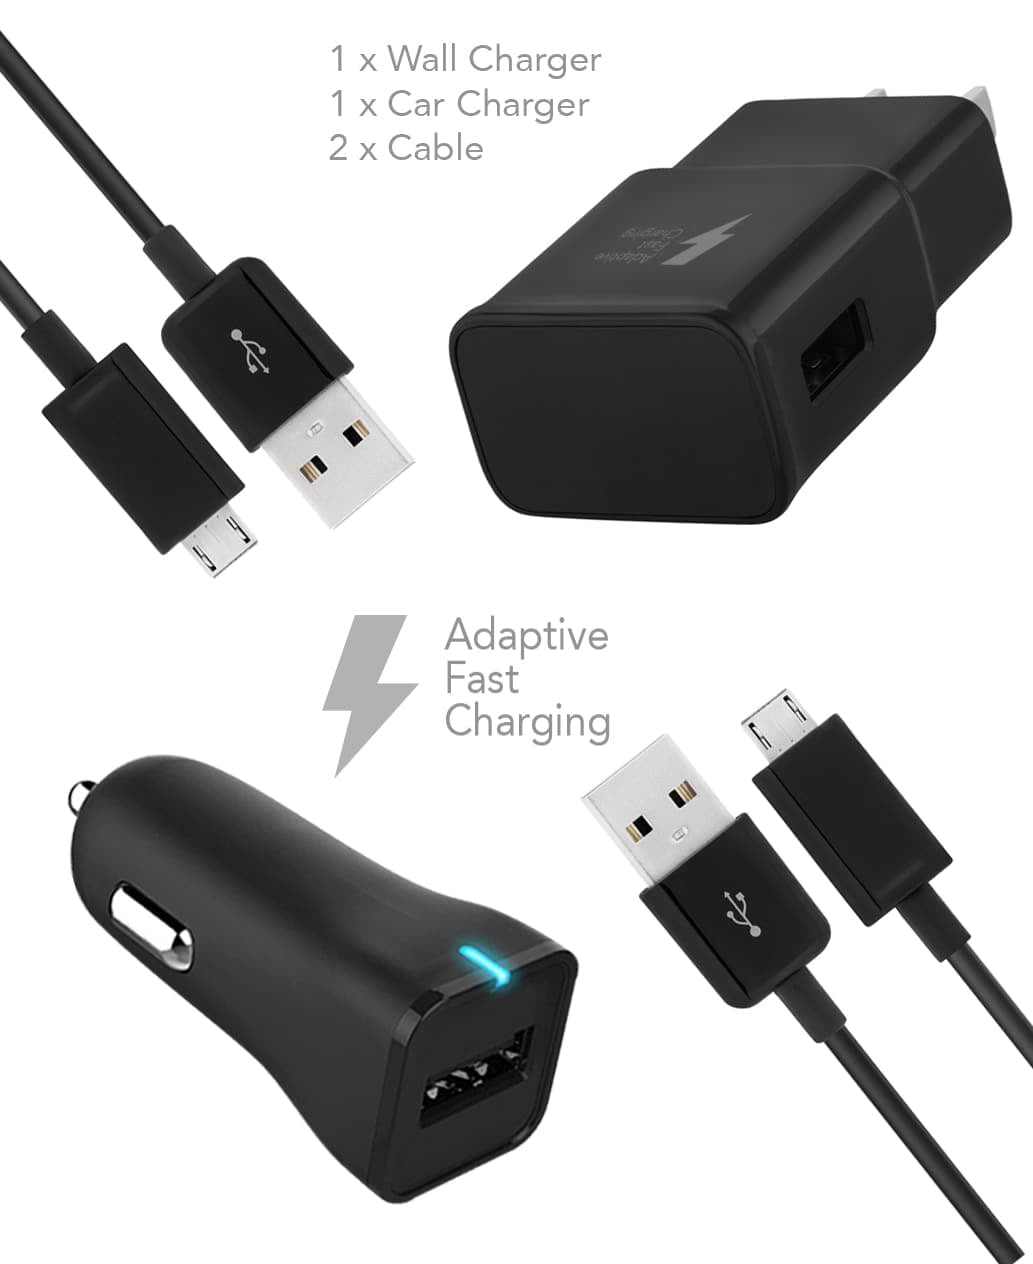 w 6-foot Cable 10W 2A USB Power Adapter Charger for ASUS ZenPad 10 Z300C Tablet 